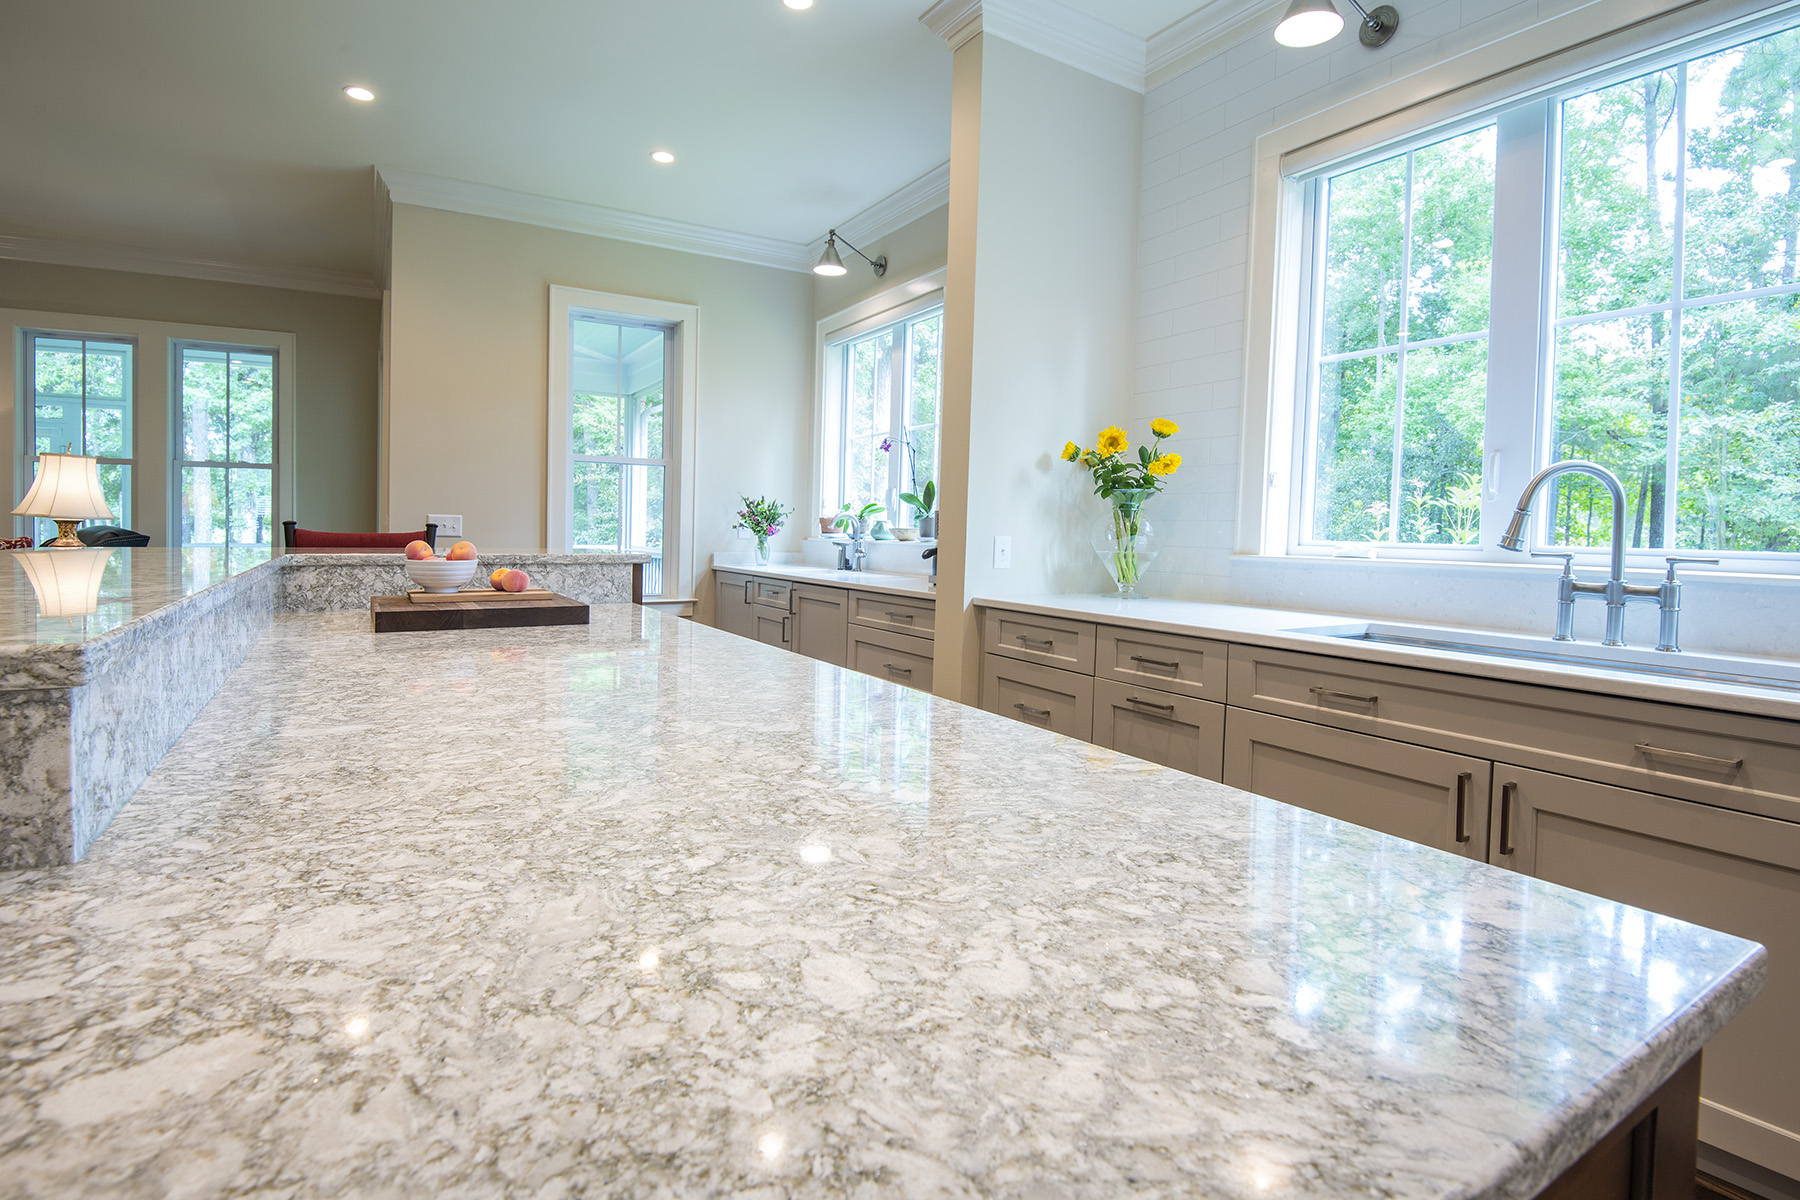 Best Material To Use For Kitchen Countertops Besto Blog